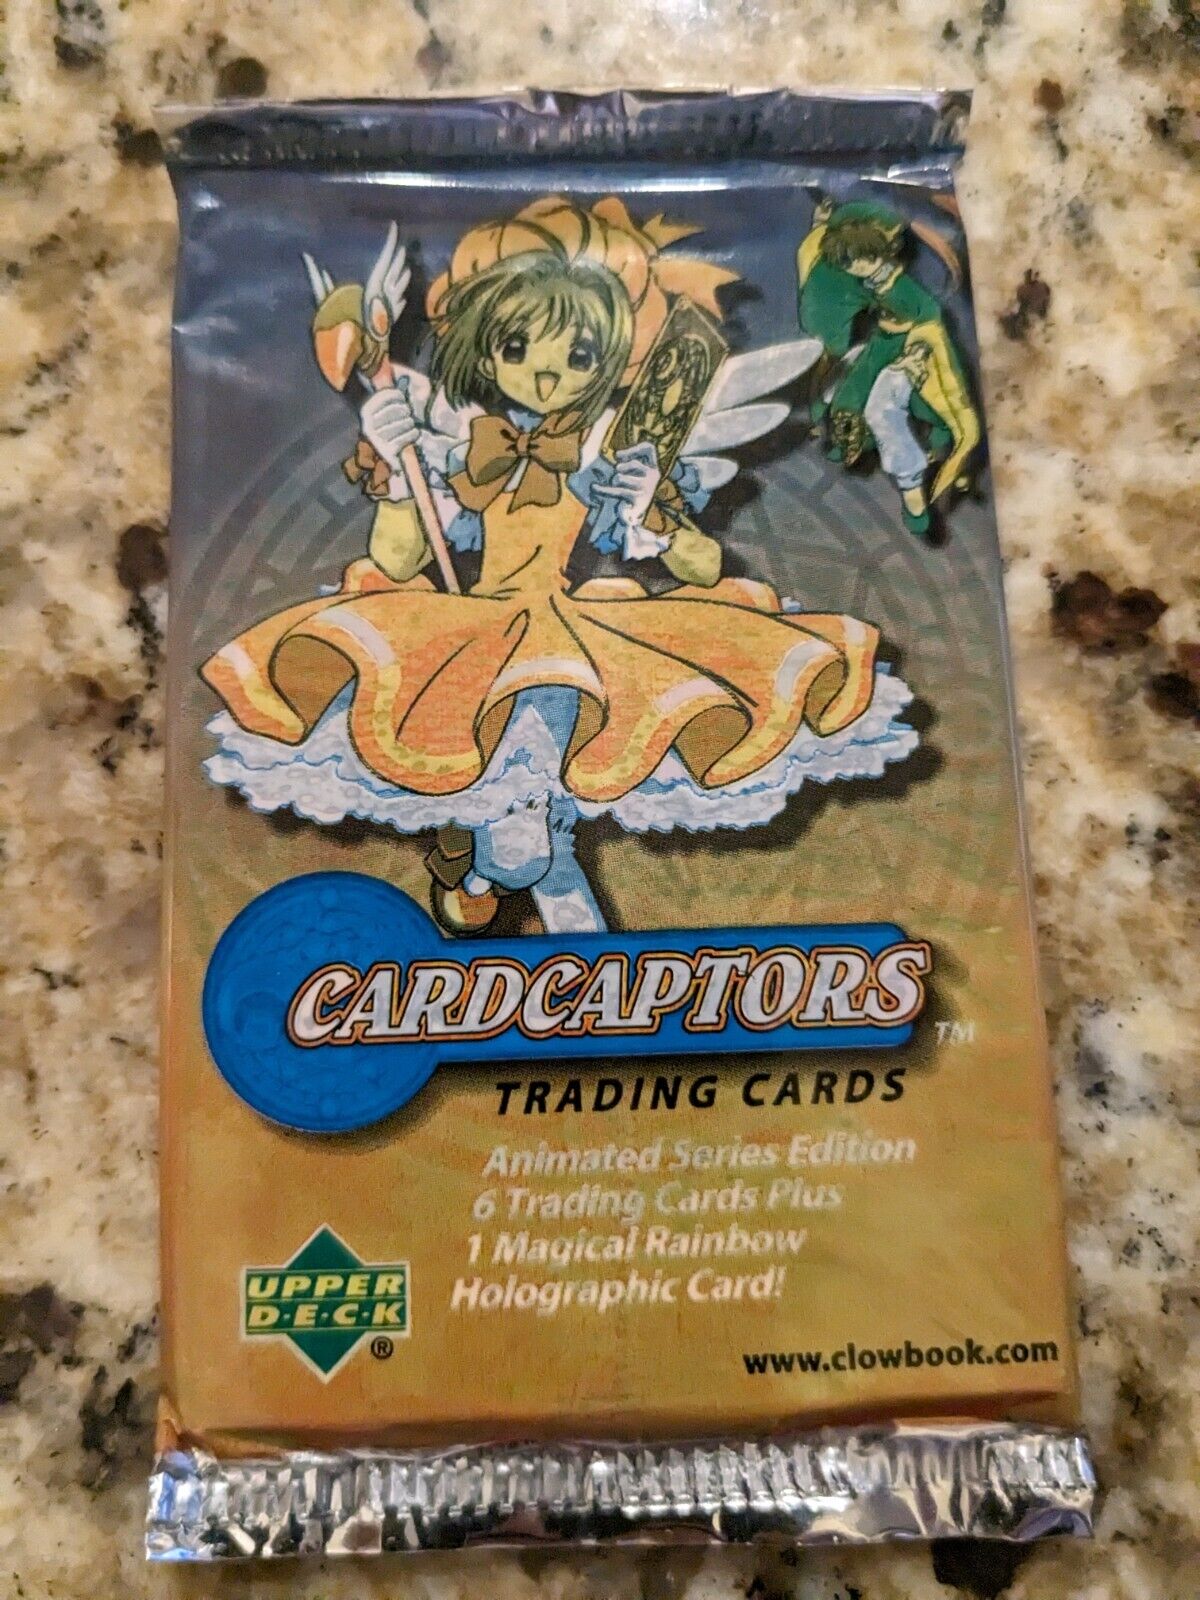 CARDCAPTORS TRADING CARD PACK(S) UPPER DECK FACTORY NEW UNOPENED UNSEARCHED